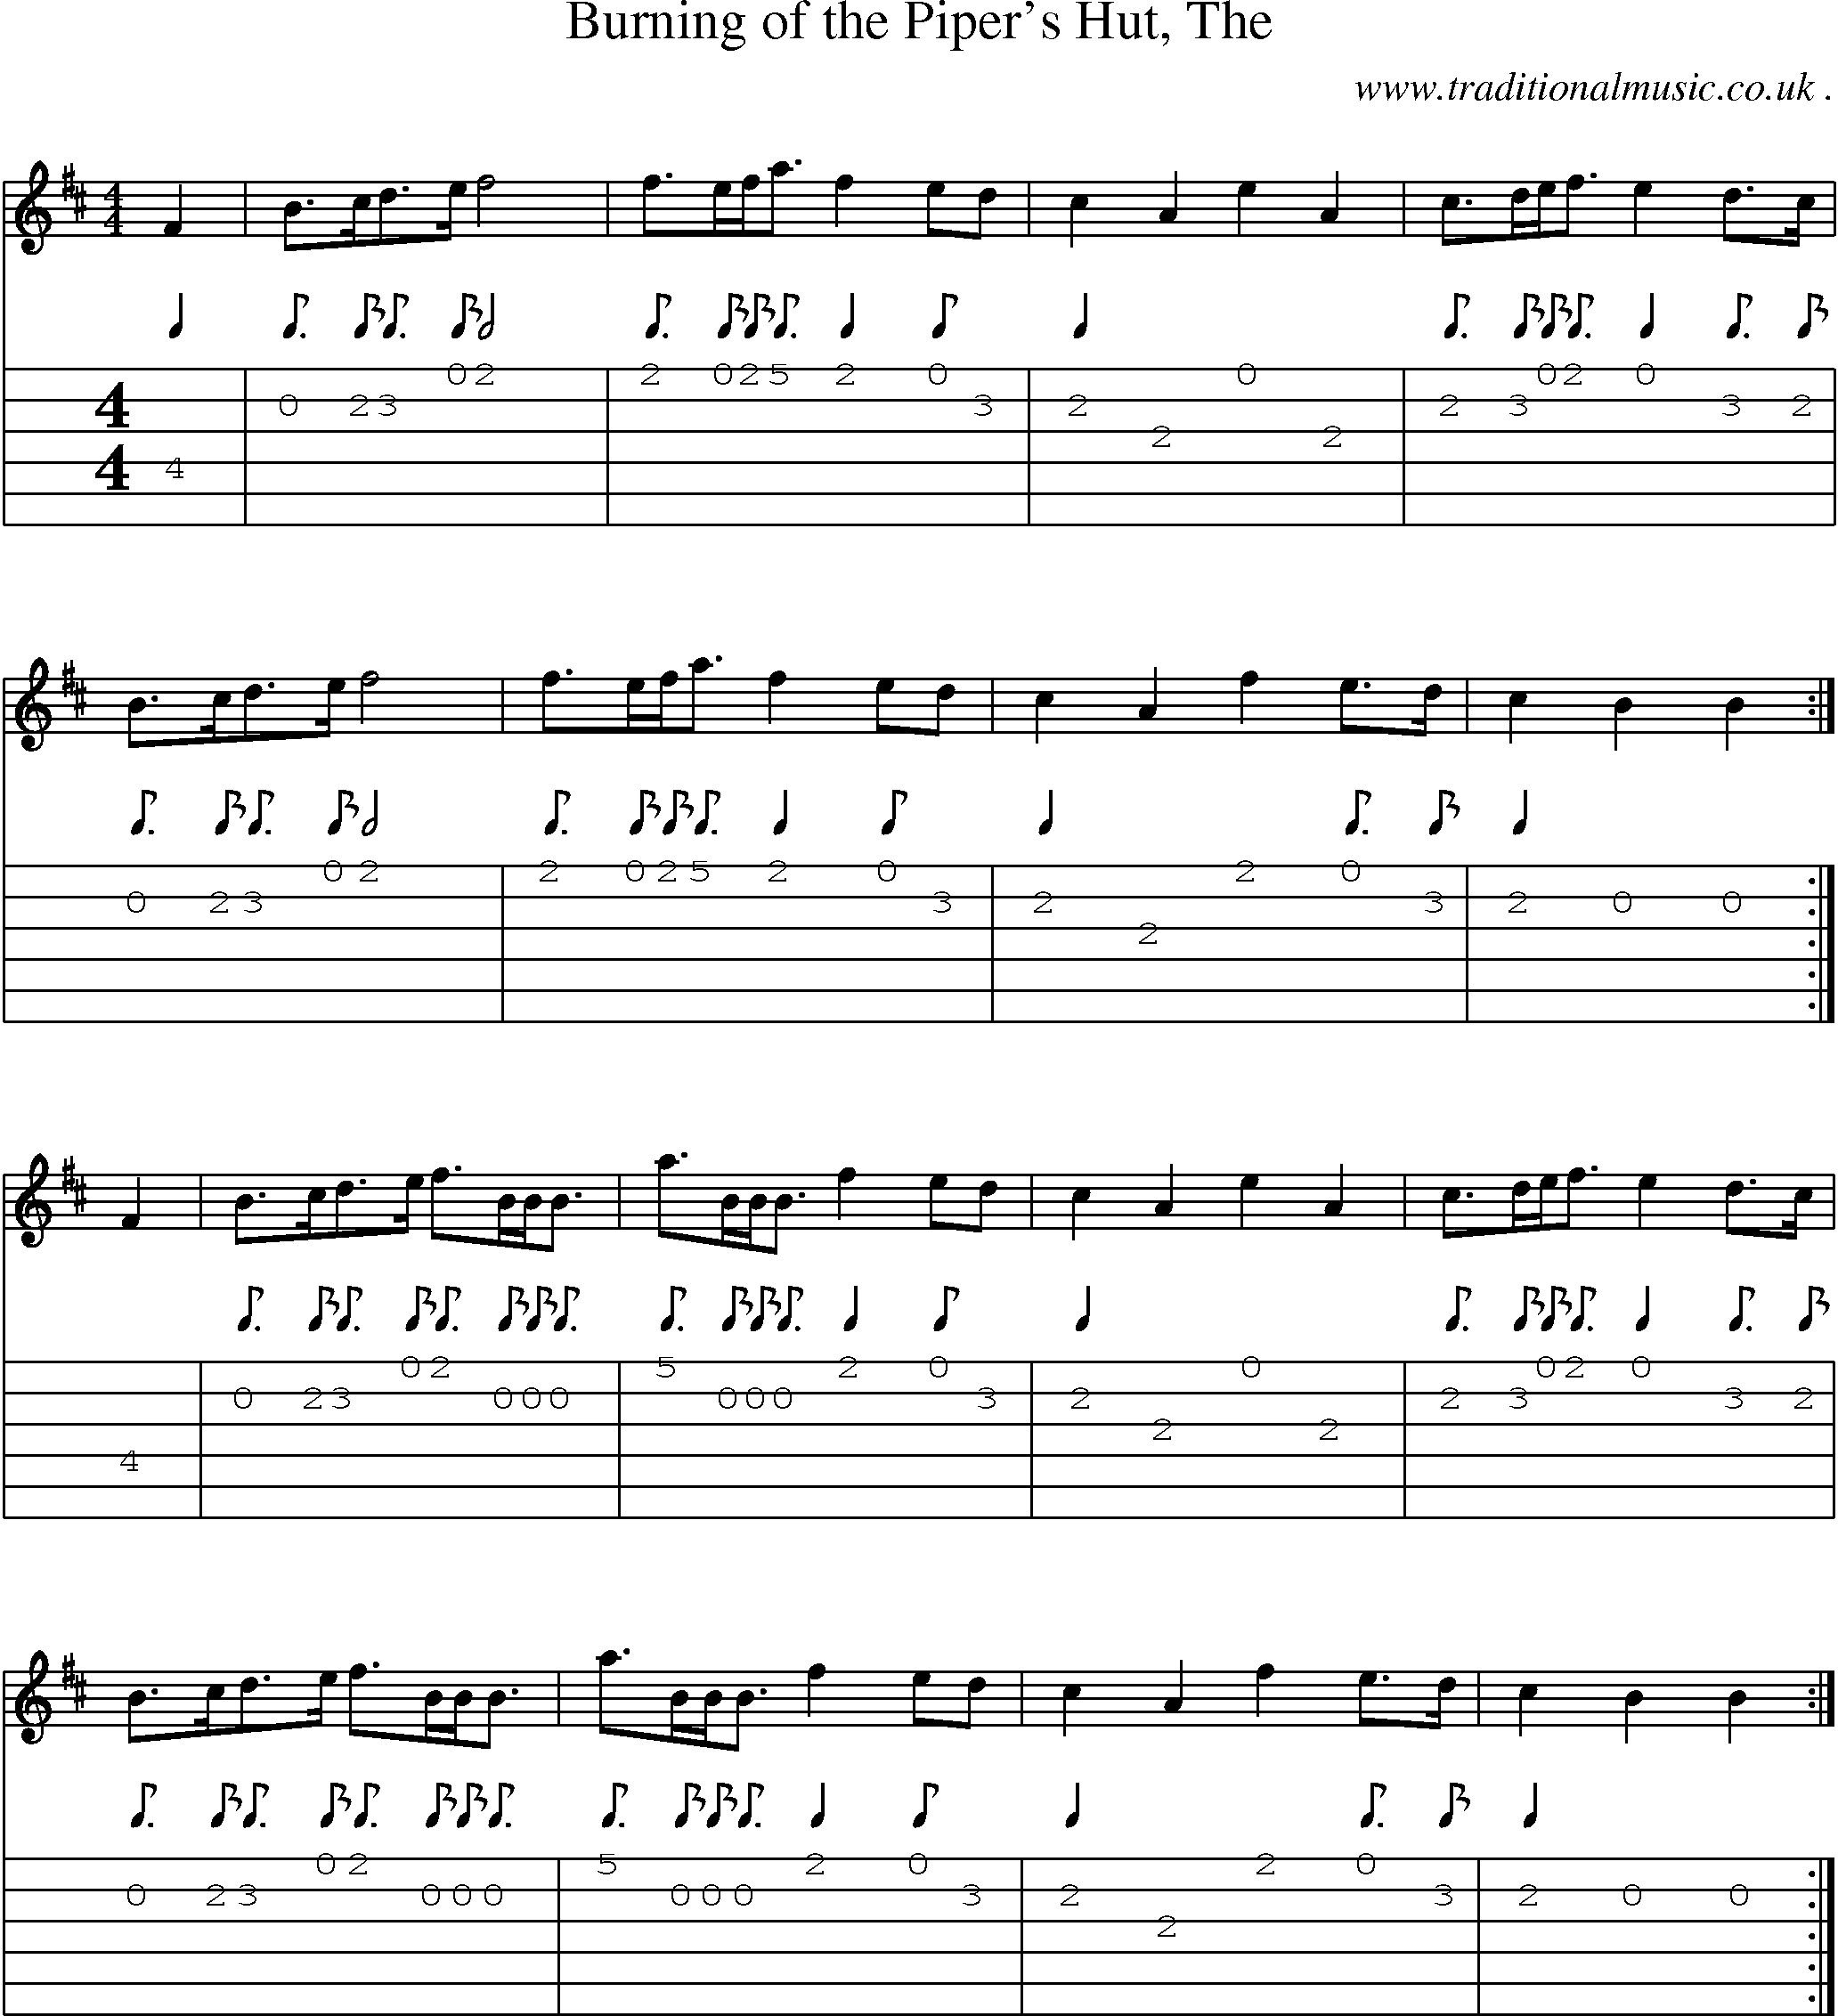 Sheet-music  score, Chords and Guitar Tabs for Burning Of The Pipers Hut The